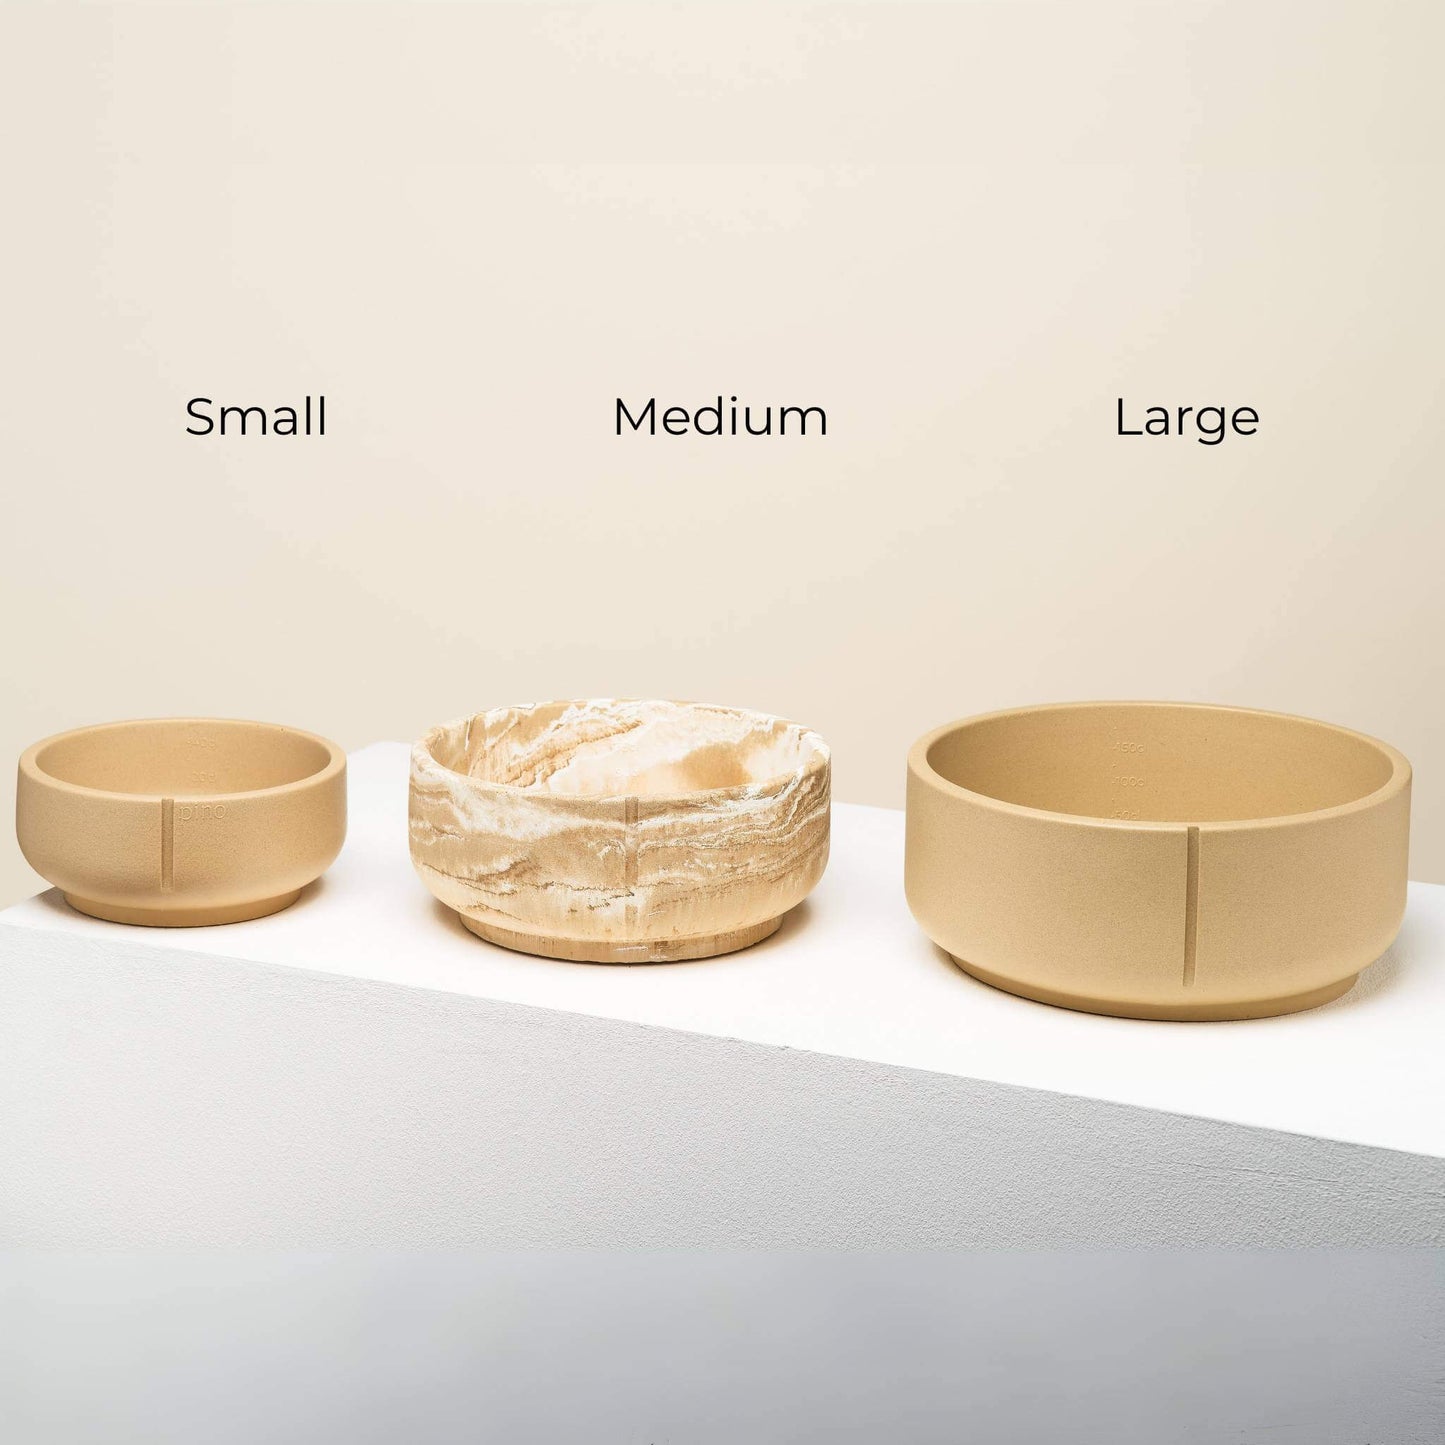 The diffrent sizes of the bowls in Camel Brown color